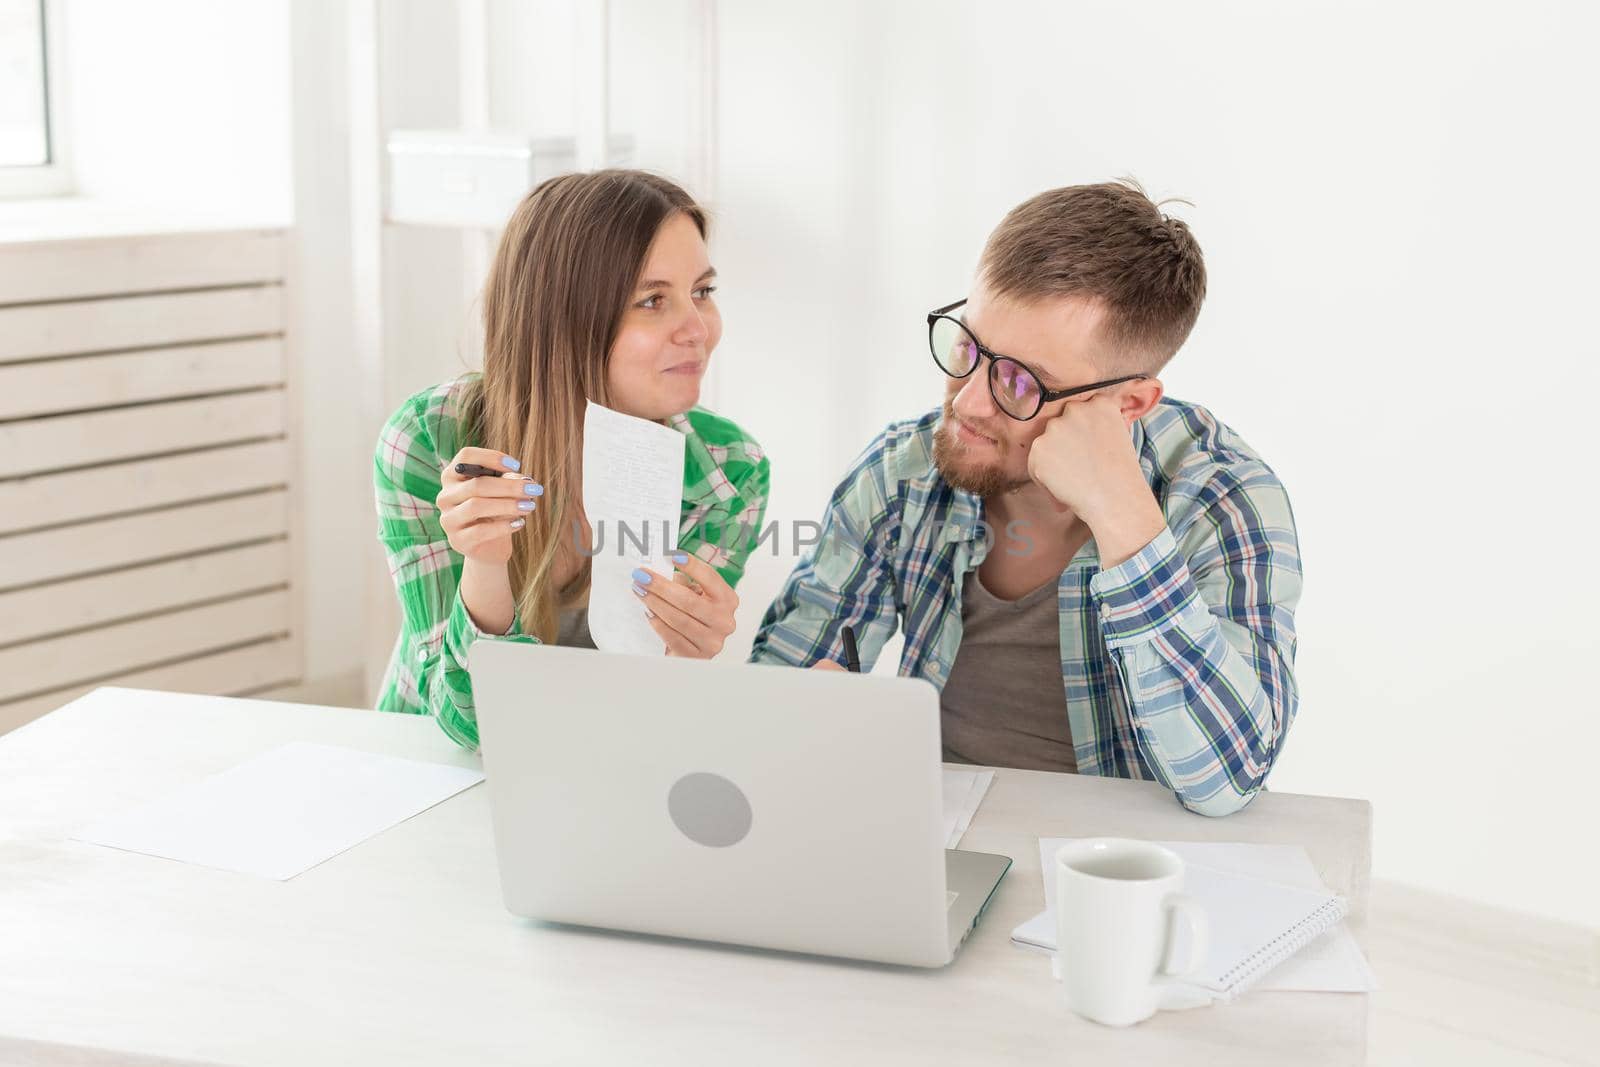 Surprised married couple. Husband and wife are considering bills for paying an apartment and are shocked at the amount received by writing down the results in their home accounting in a laptop